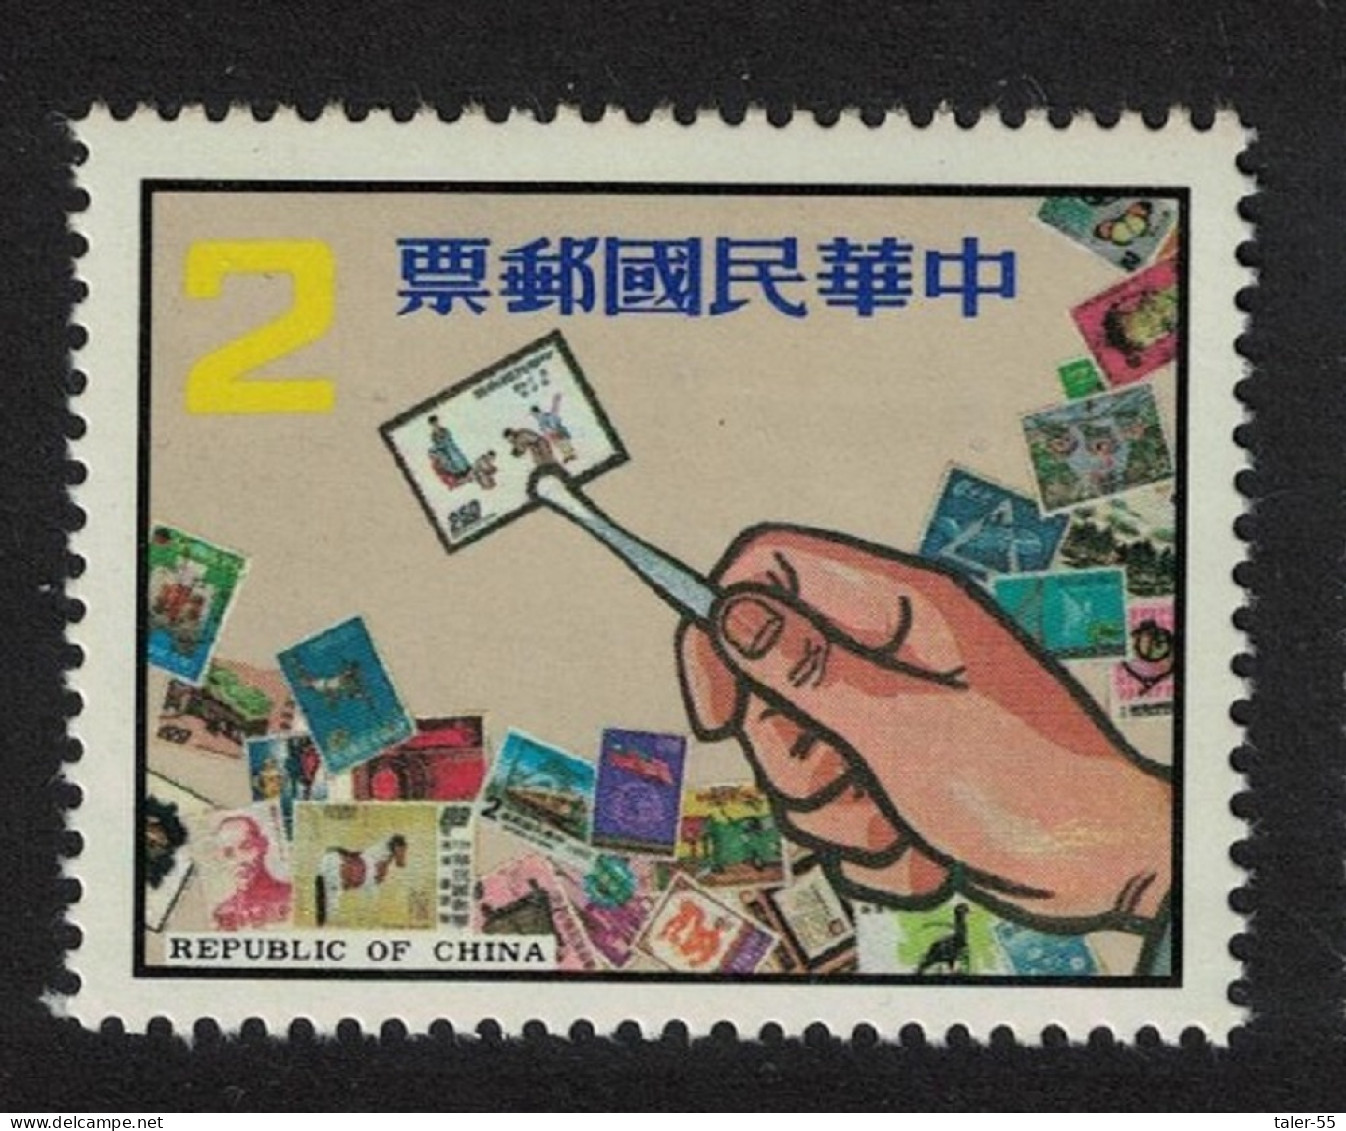 Taiwan Philately Day $2 1982 MNH SG#1450 - Unused Stamps